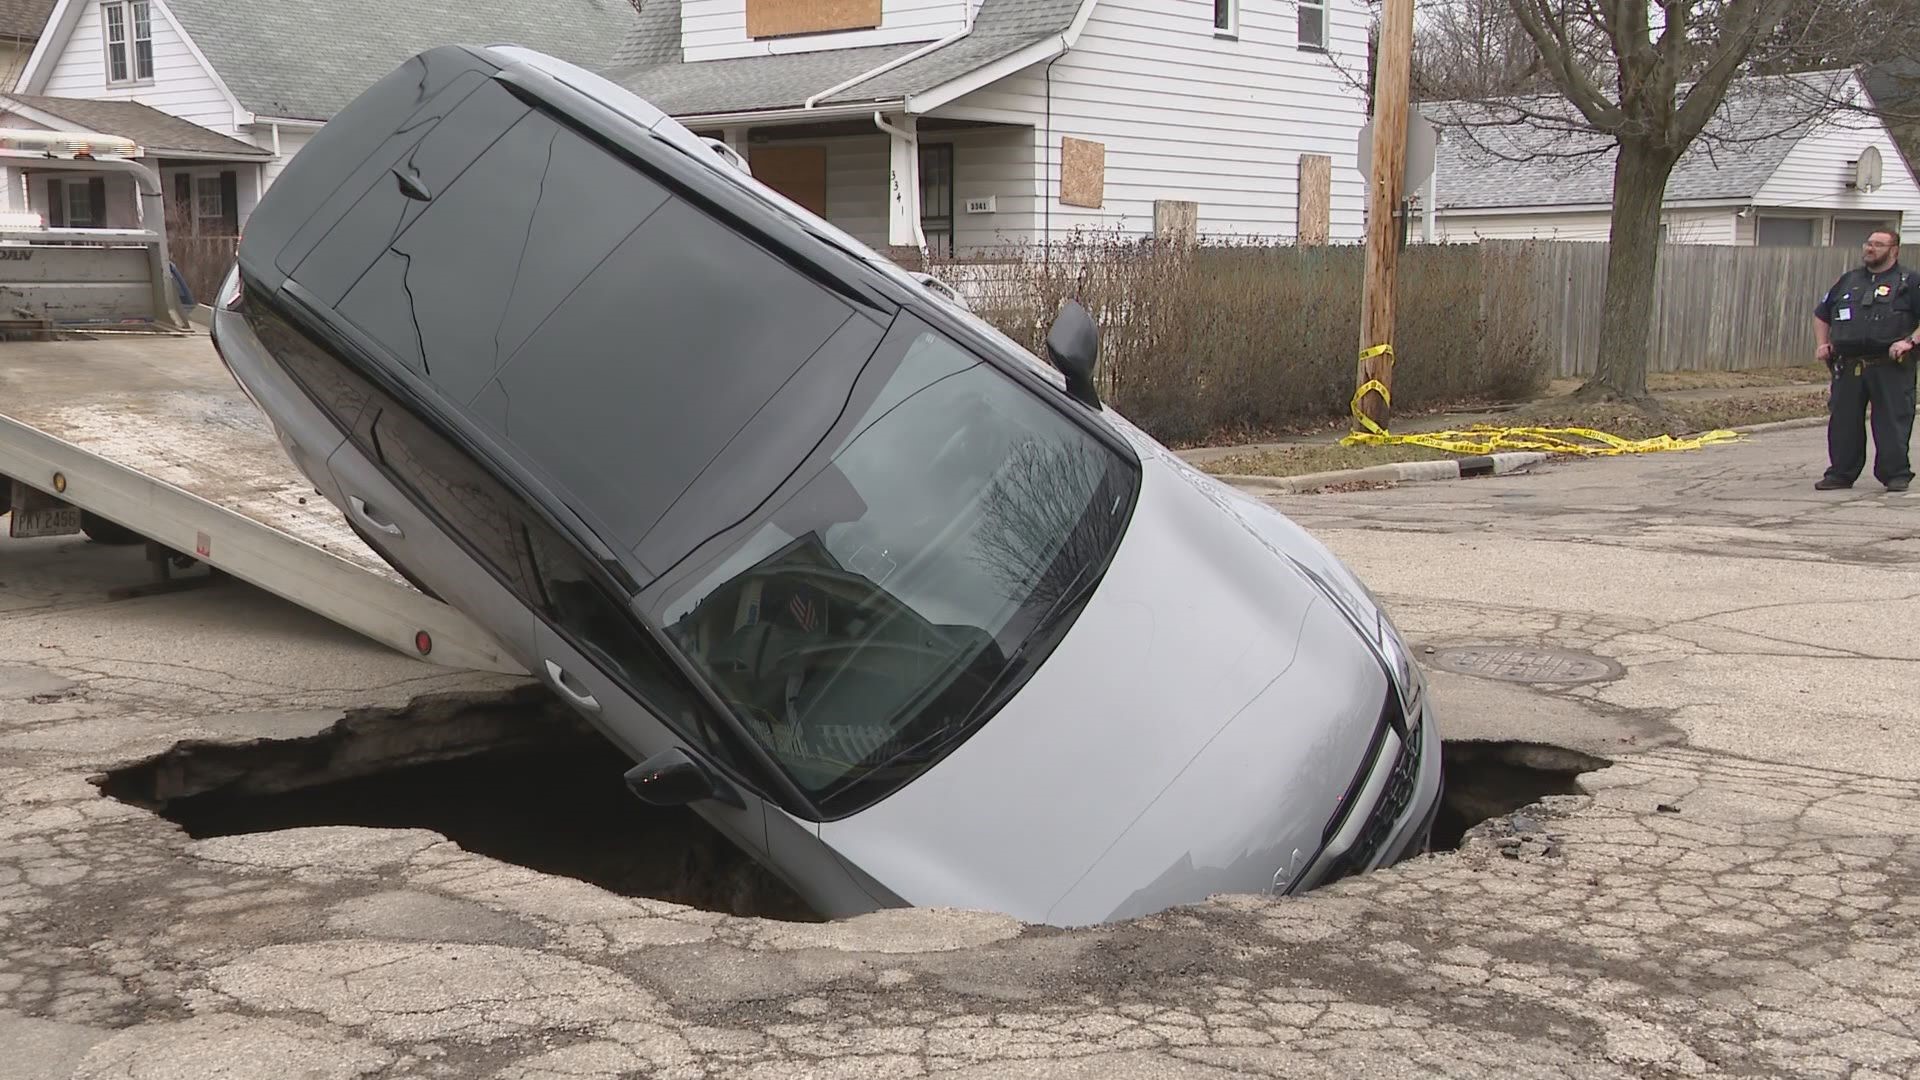 Massive sinkhole swallows up car in Cleveland.